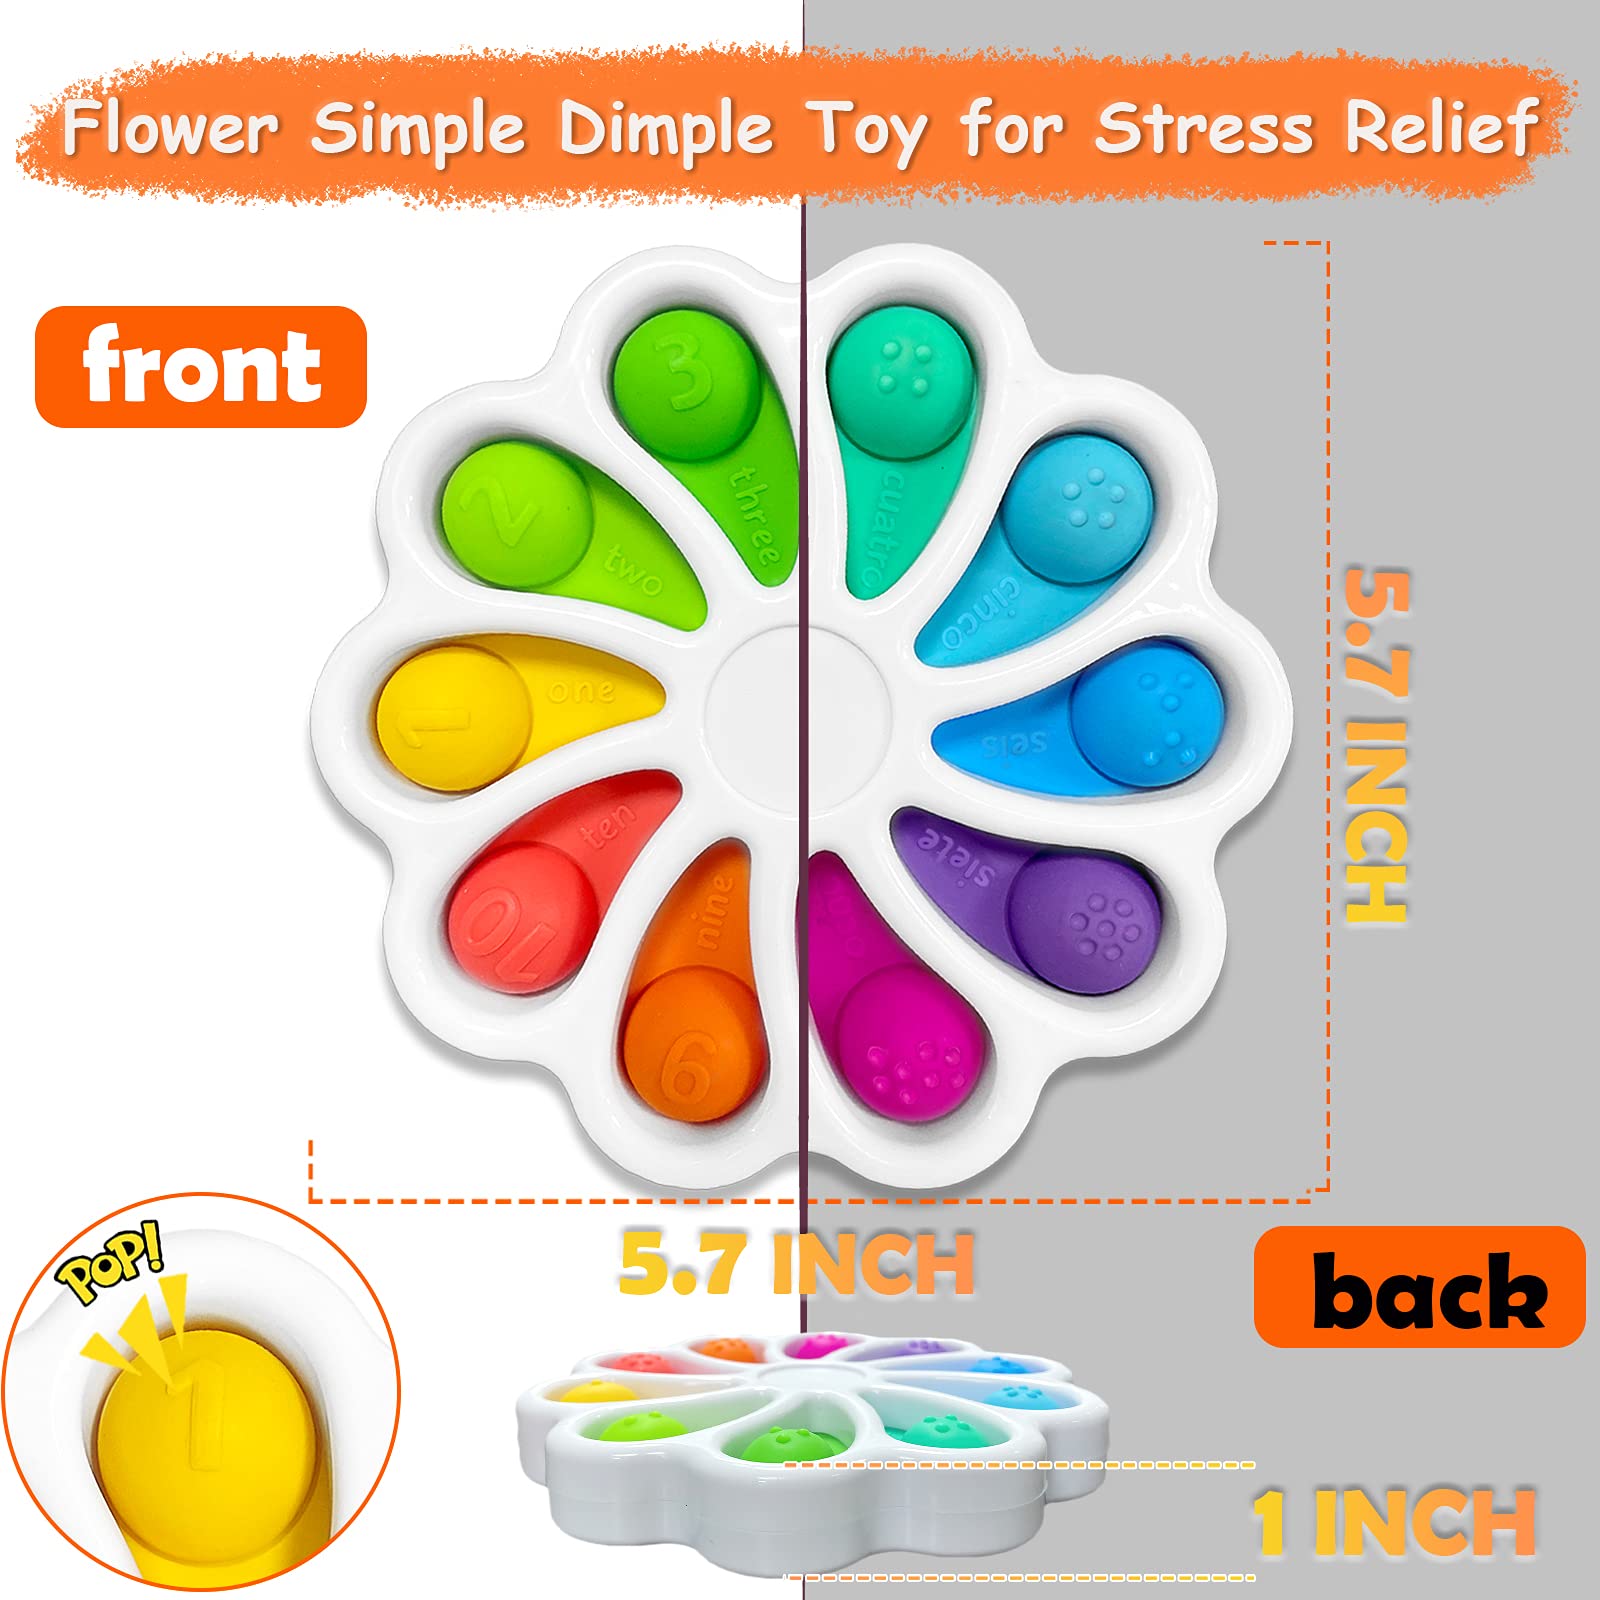 Simple Dimple Pack, Fidget Spinners Flower Pop Bubble Toy for Stress Relief and ADHD, Novelty Gift for Rewards Kids Birthday Party